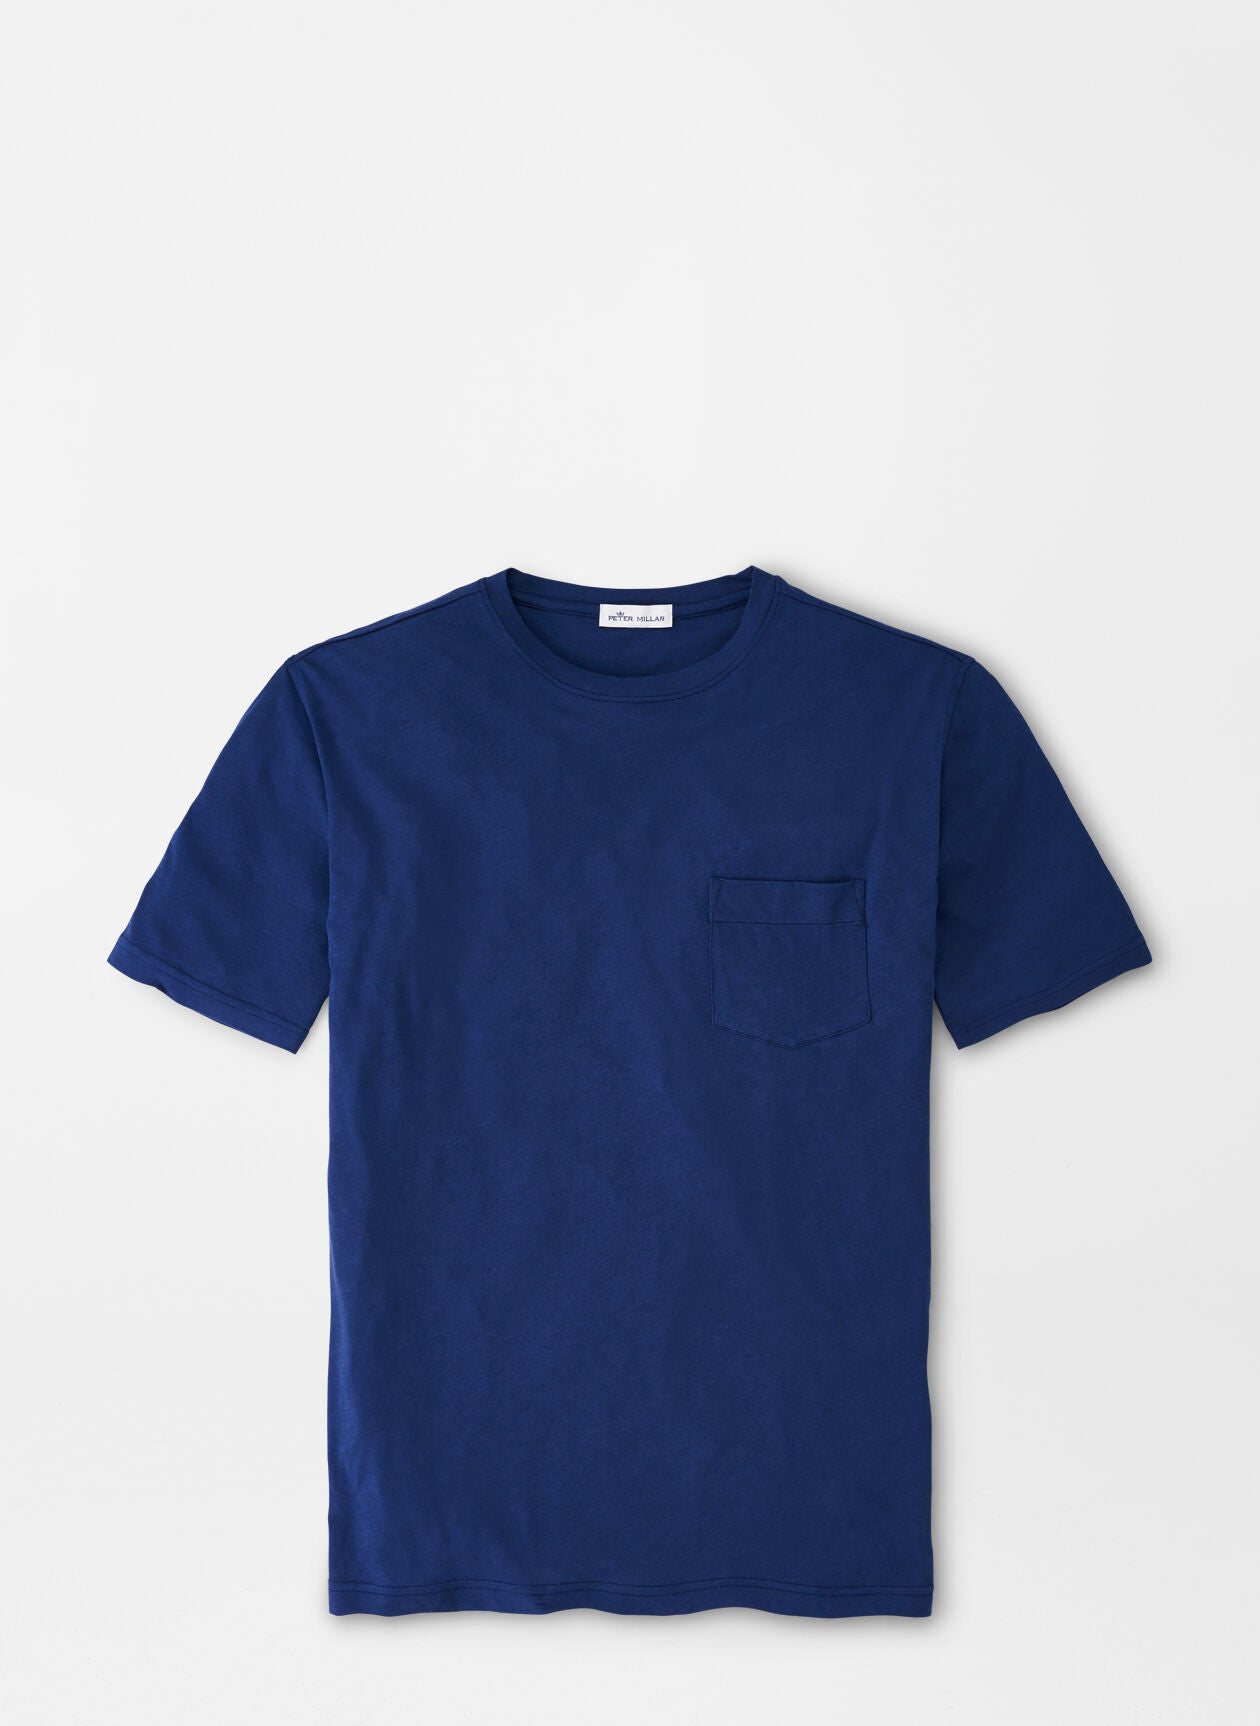 Seaside Summer Soft Pocket Tee- Two Colors